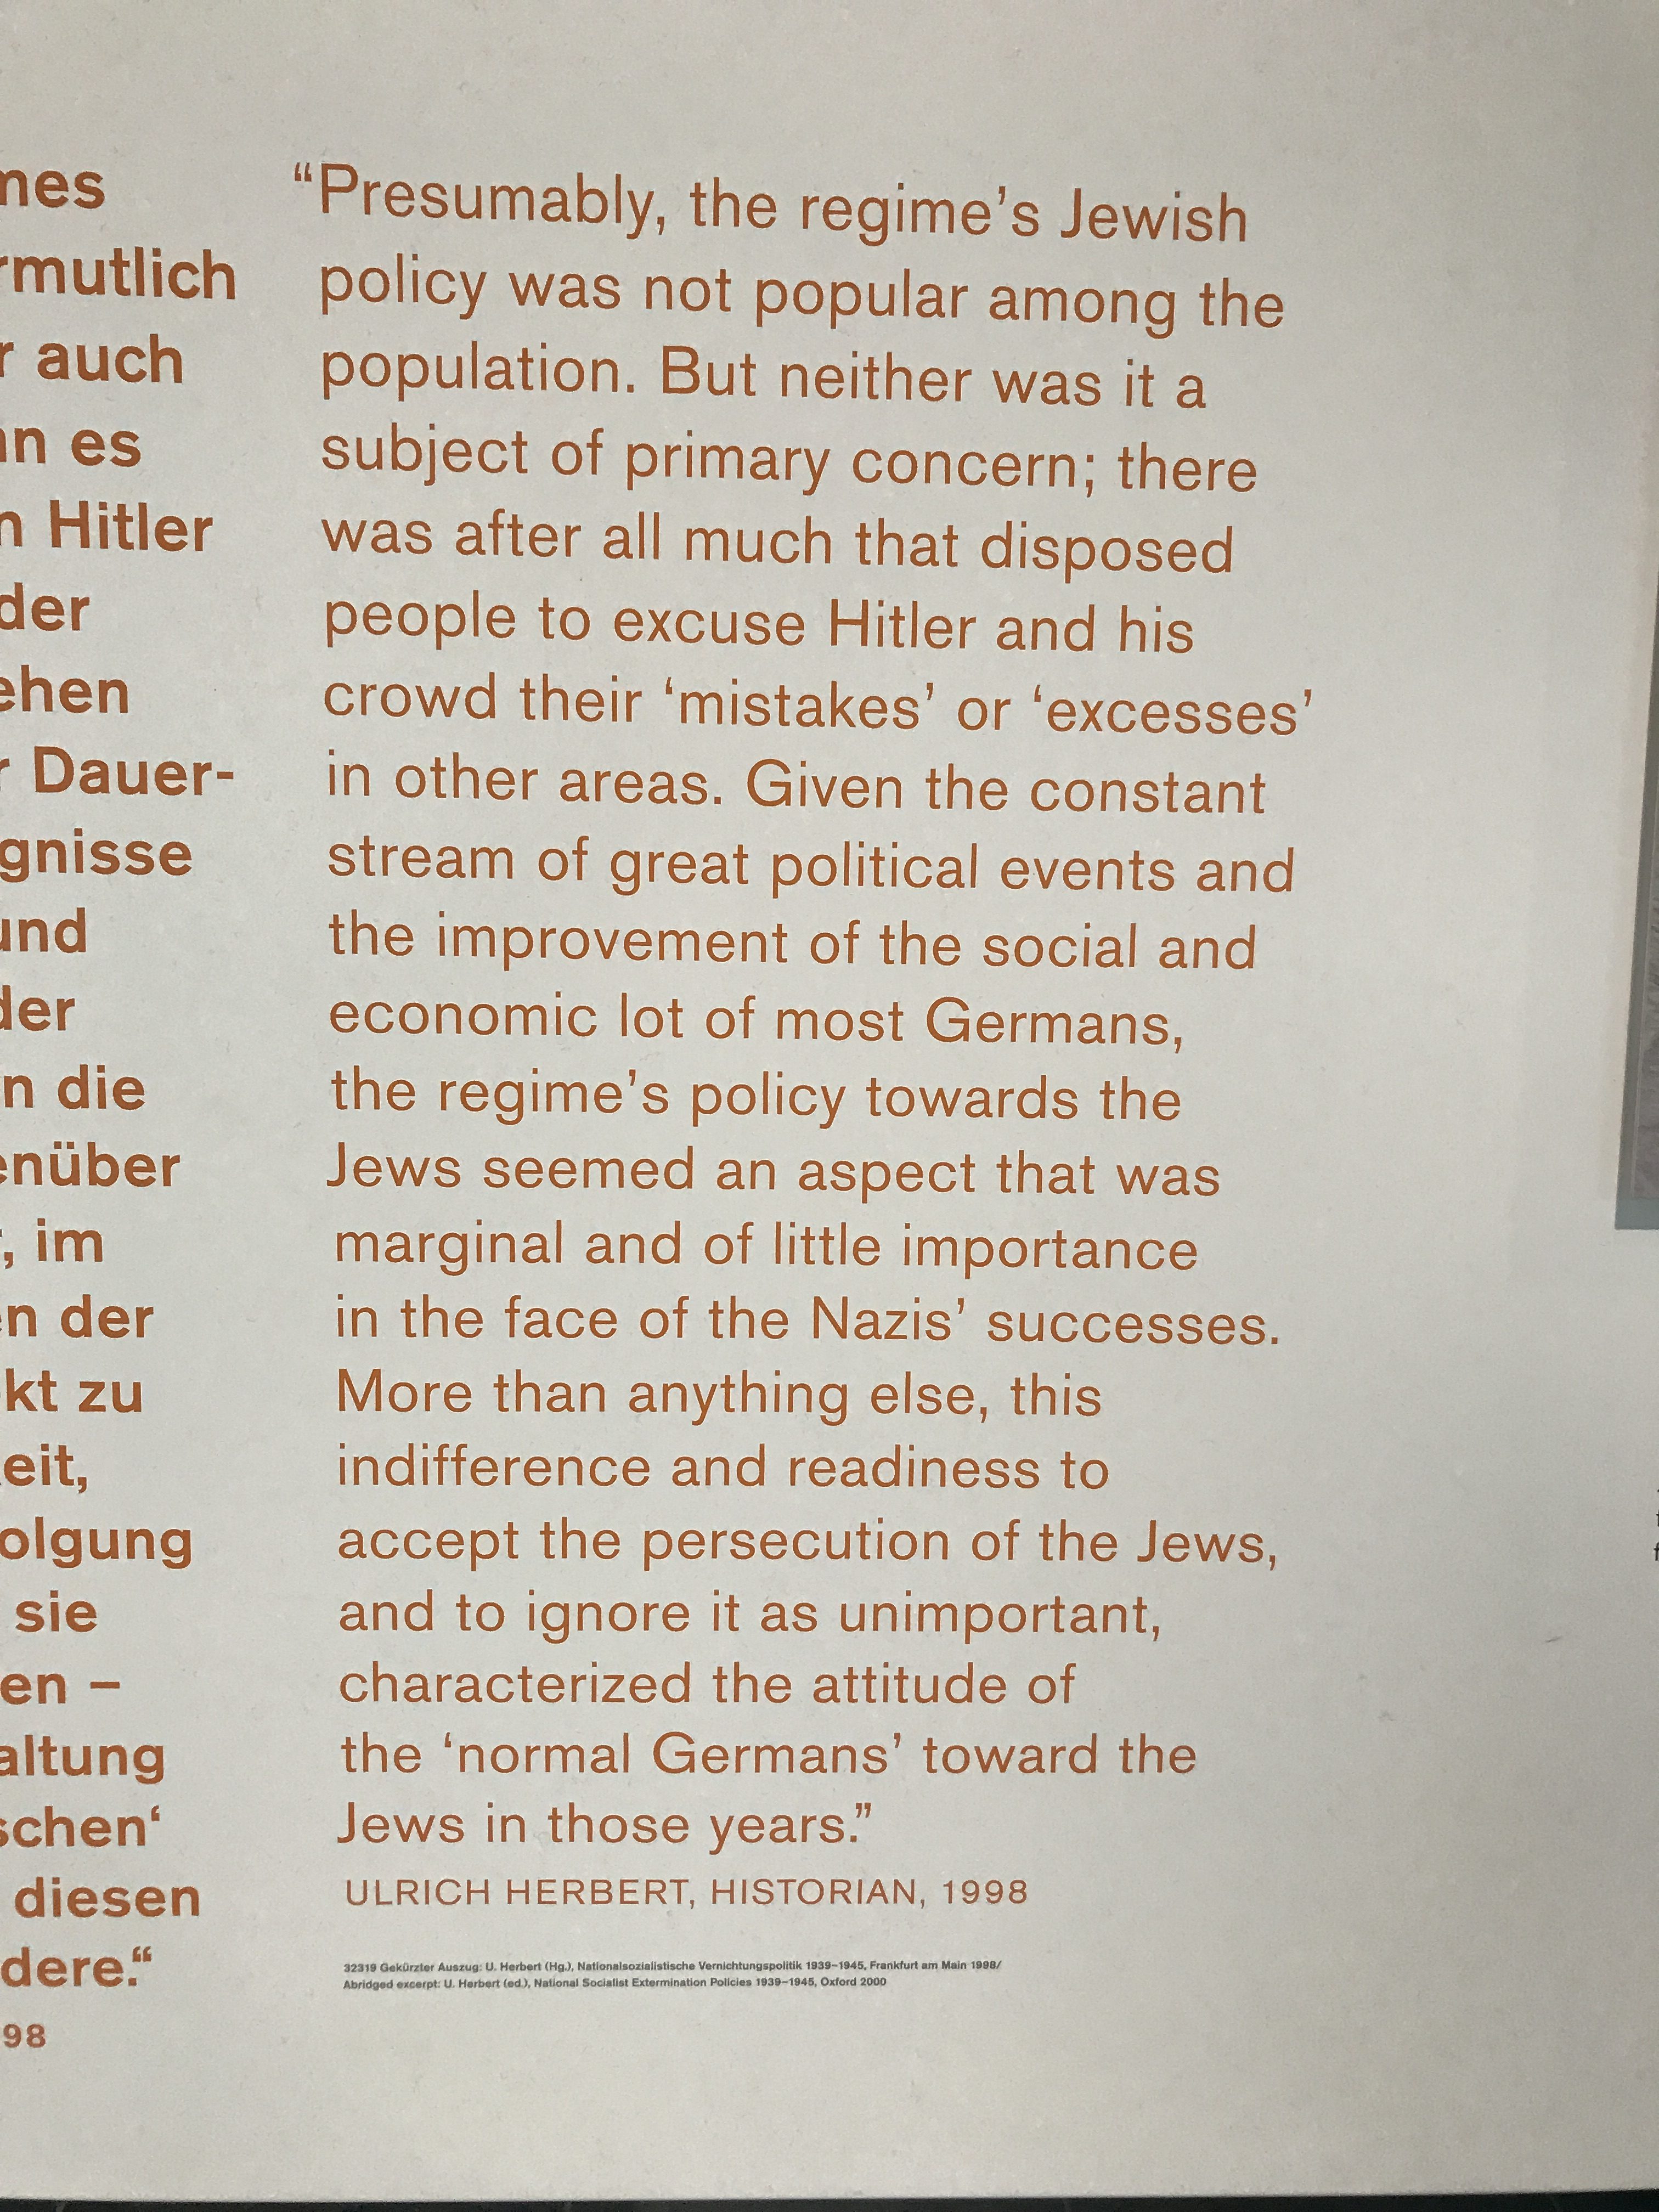 An important quote from the Topography of Terror that all Americans should think about.